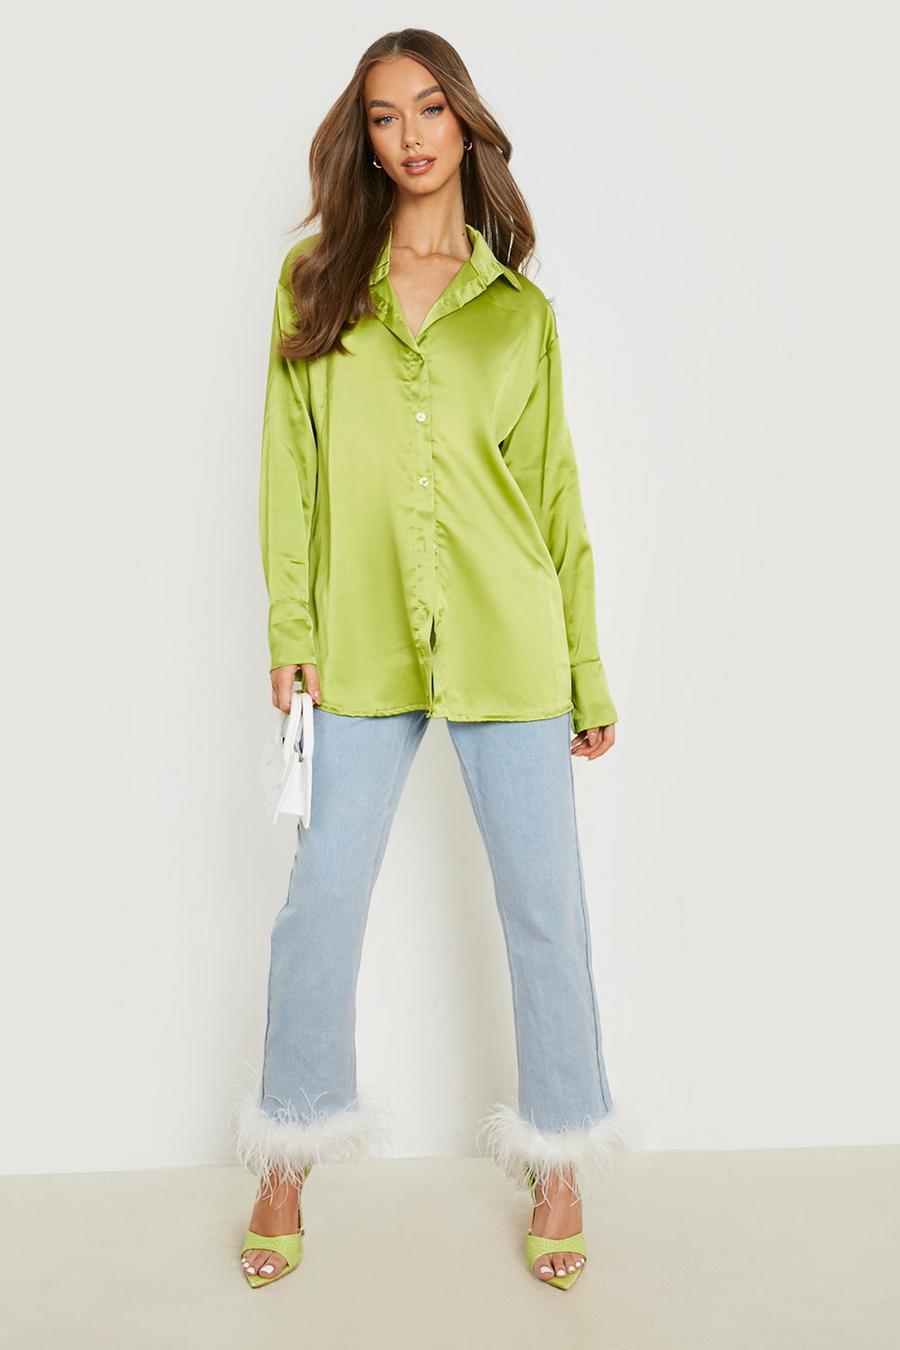 Chartreuse yellow Satin Deep Cuff Relaxed Fit Shirt